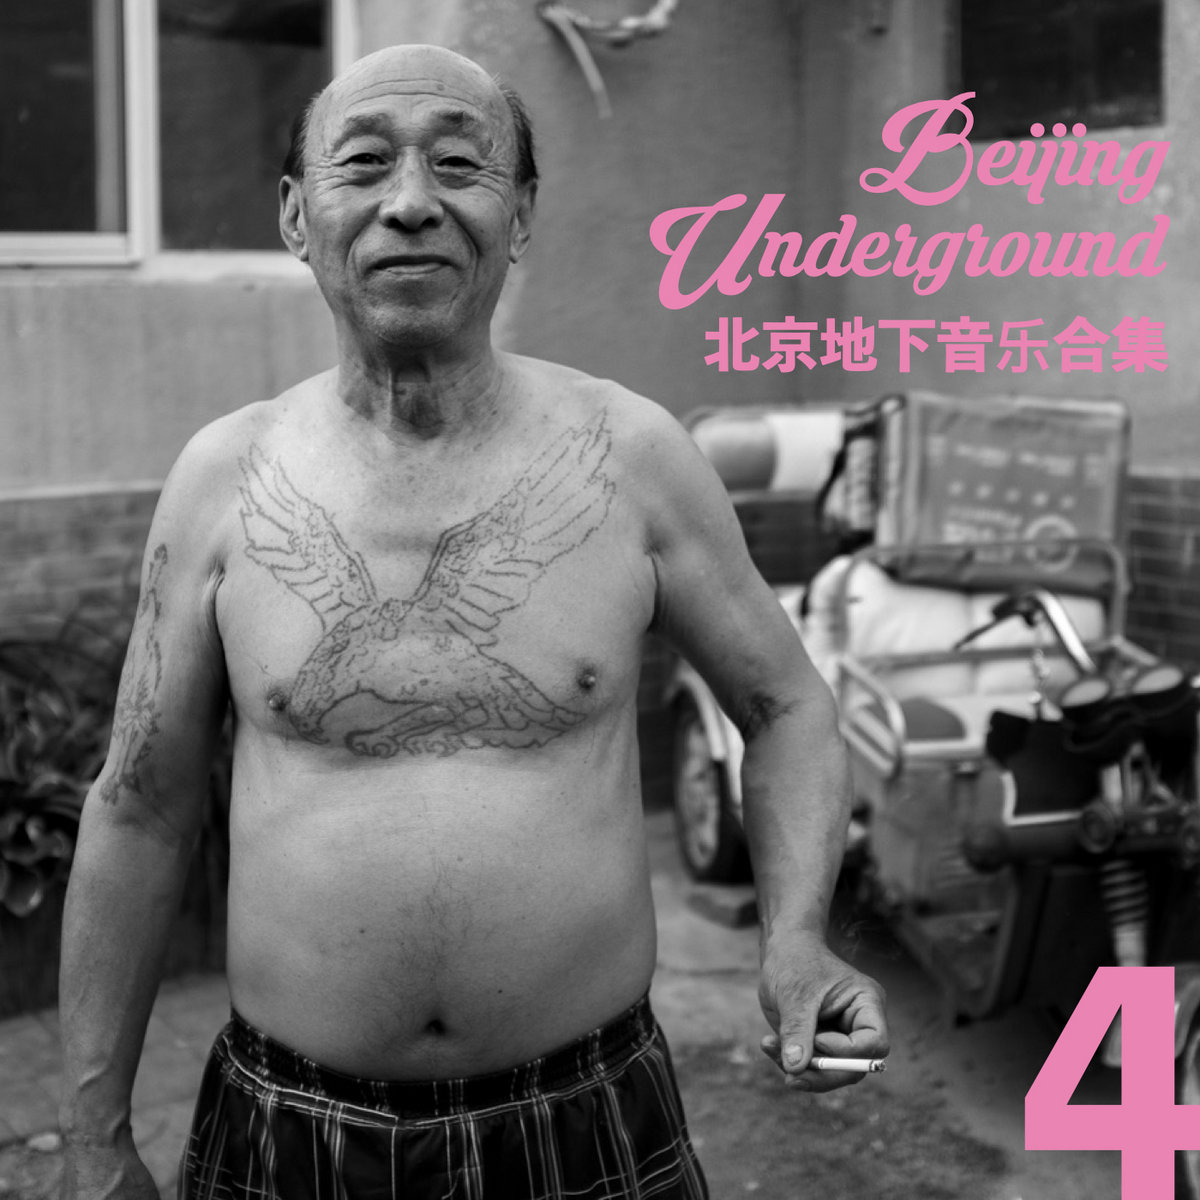 The Beijing Underground Compilation #4 is out !!! What’s in it ?